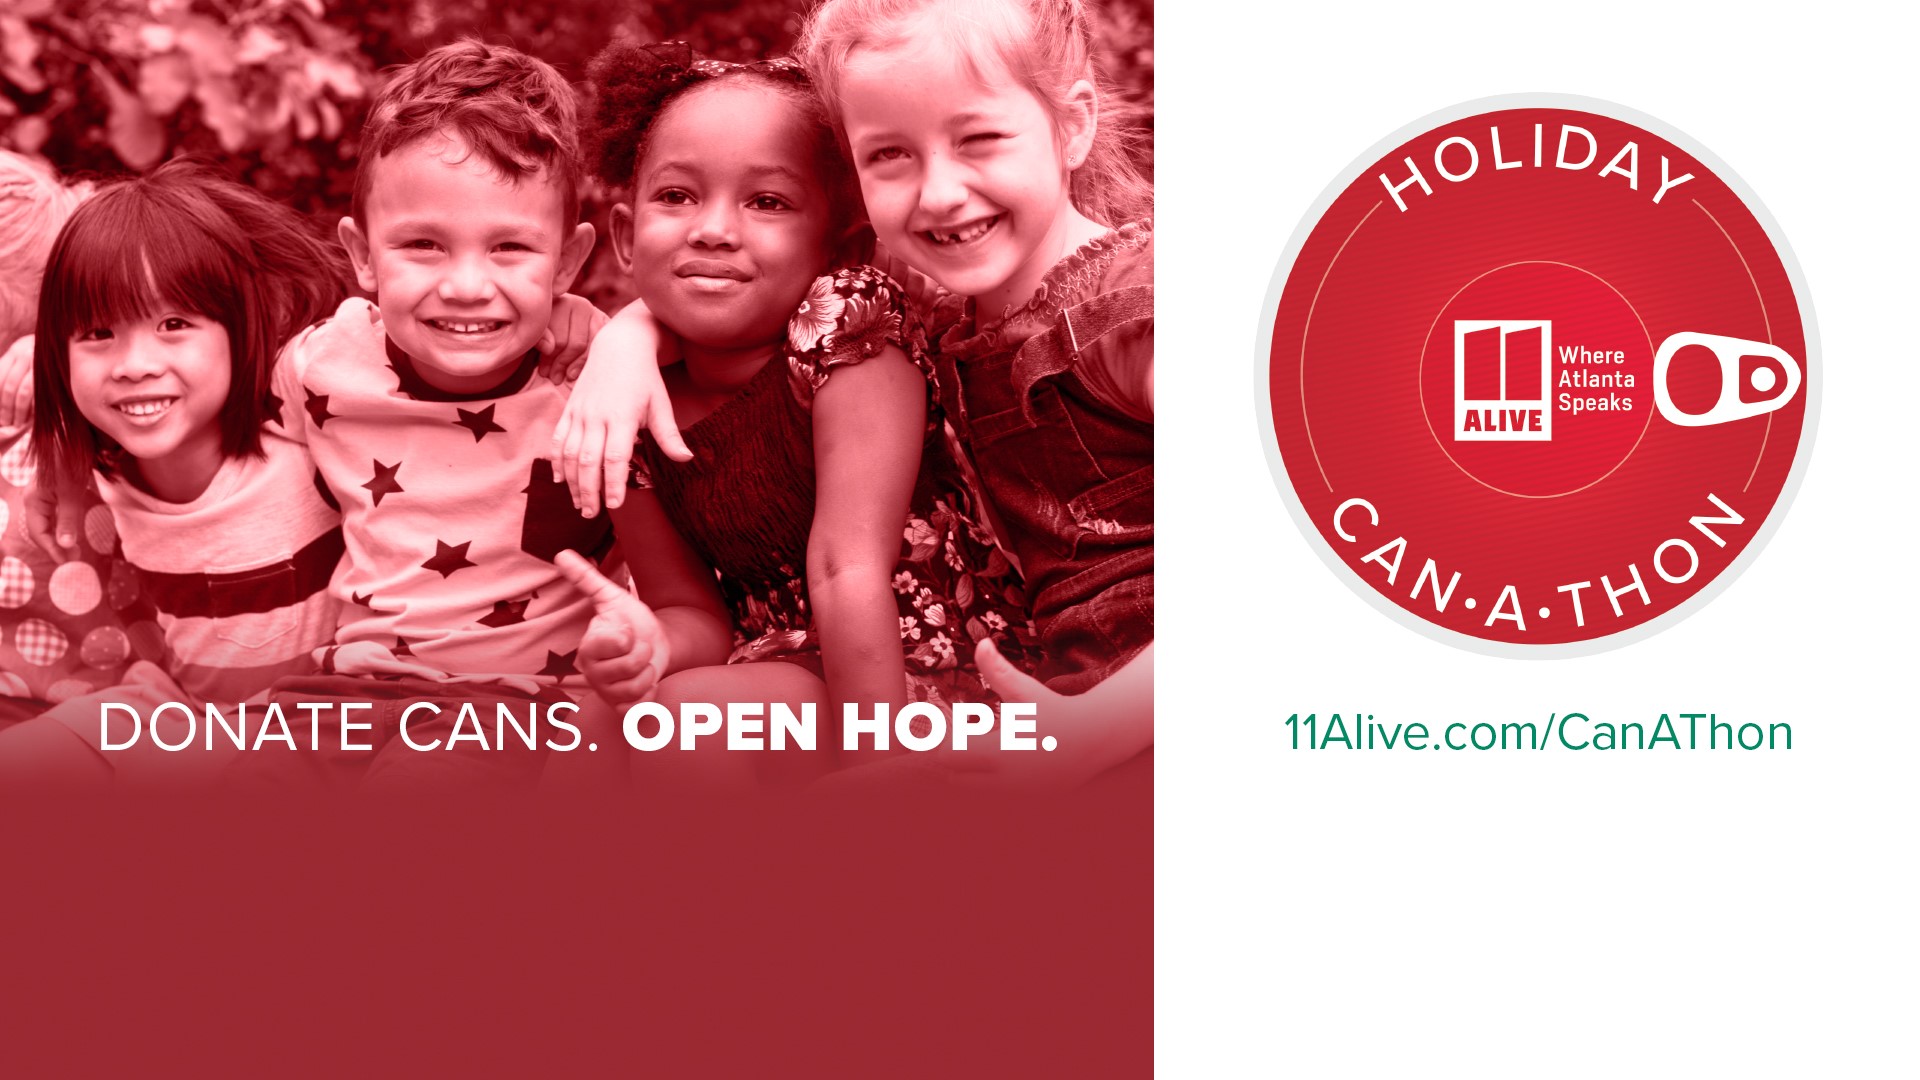 Drop off at a contactless site, donate online or call into 11Alive’s first ever Can-A-Thon telethon benefiting Salvation Army's area food pantries.